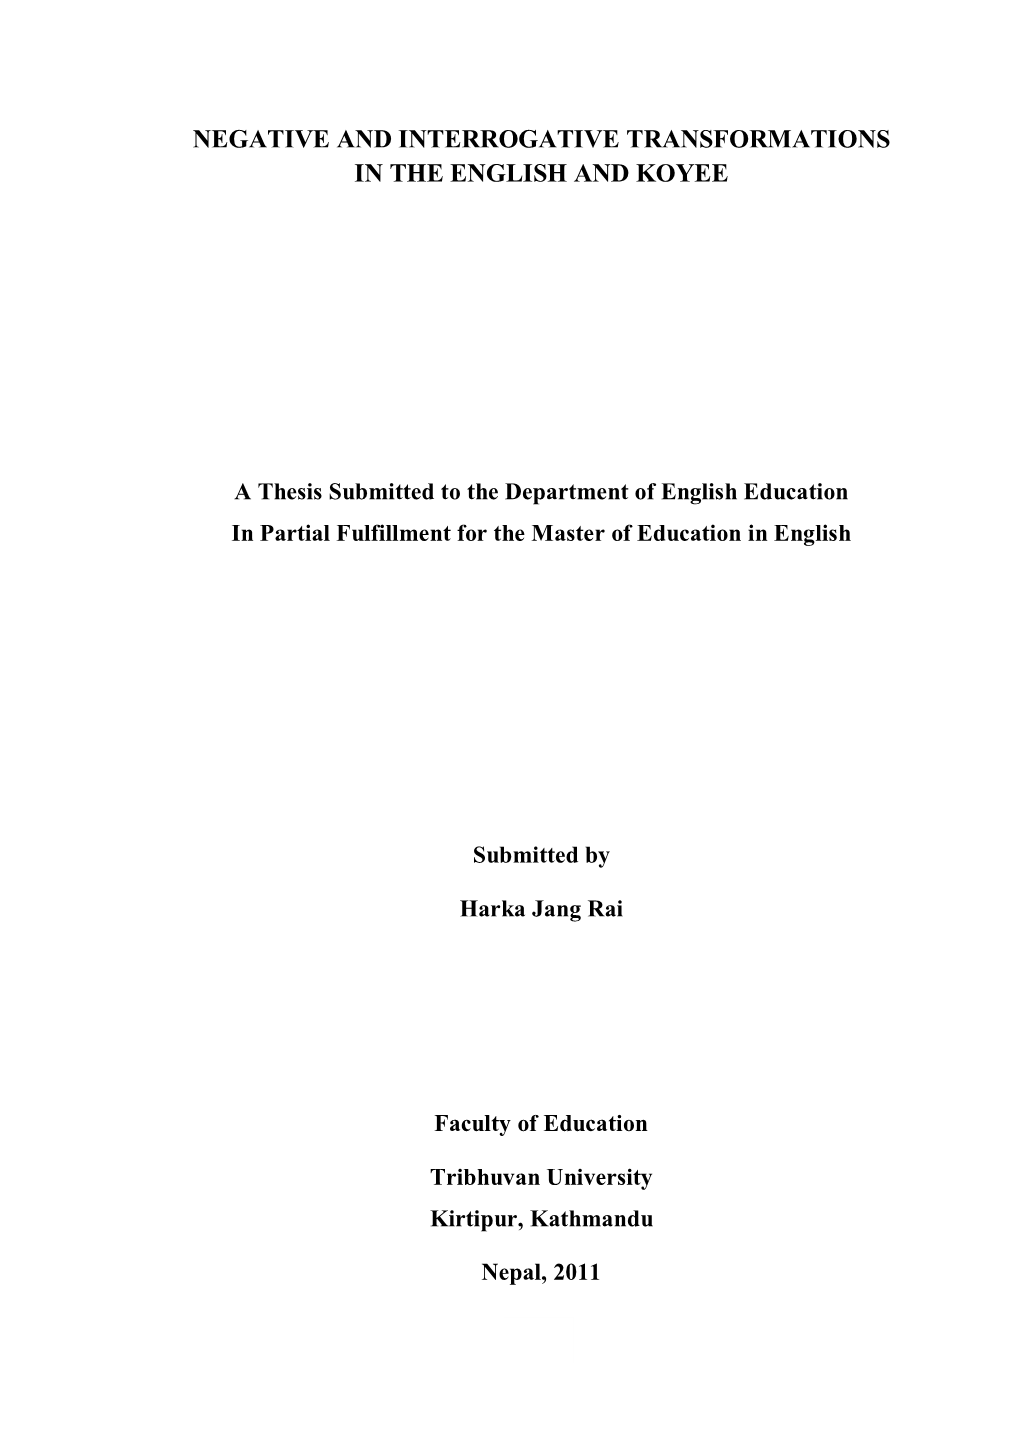 Negative and Interrogative Transformations in the English and Koyee